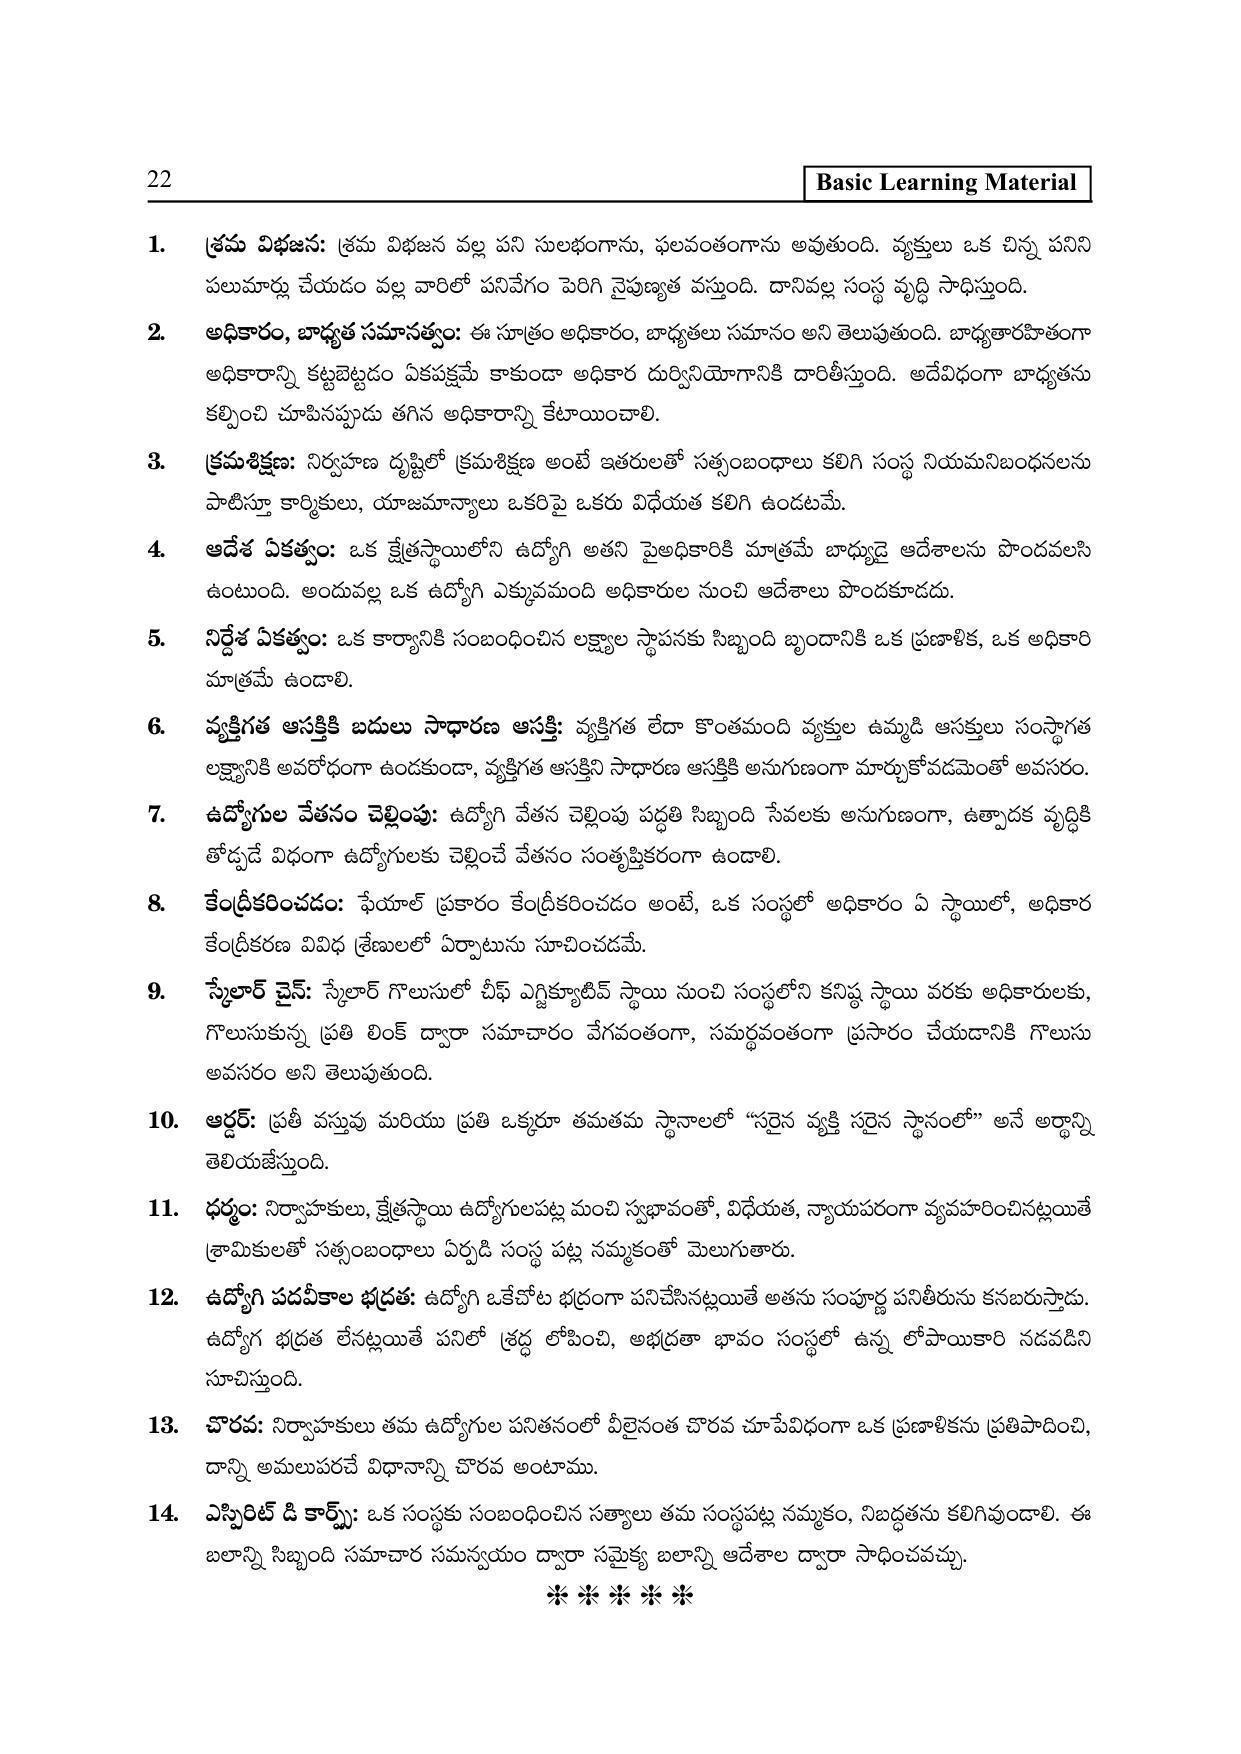 TS SCERT Inter 2nd Year Commerce &Accts II yr TM Path 1 (Telugu Medium) Text Book - Page 27